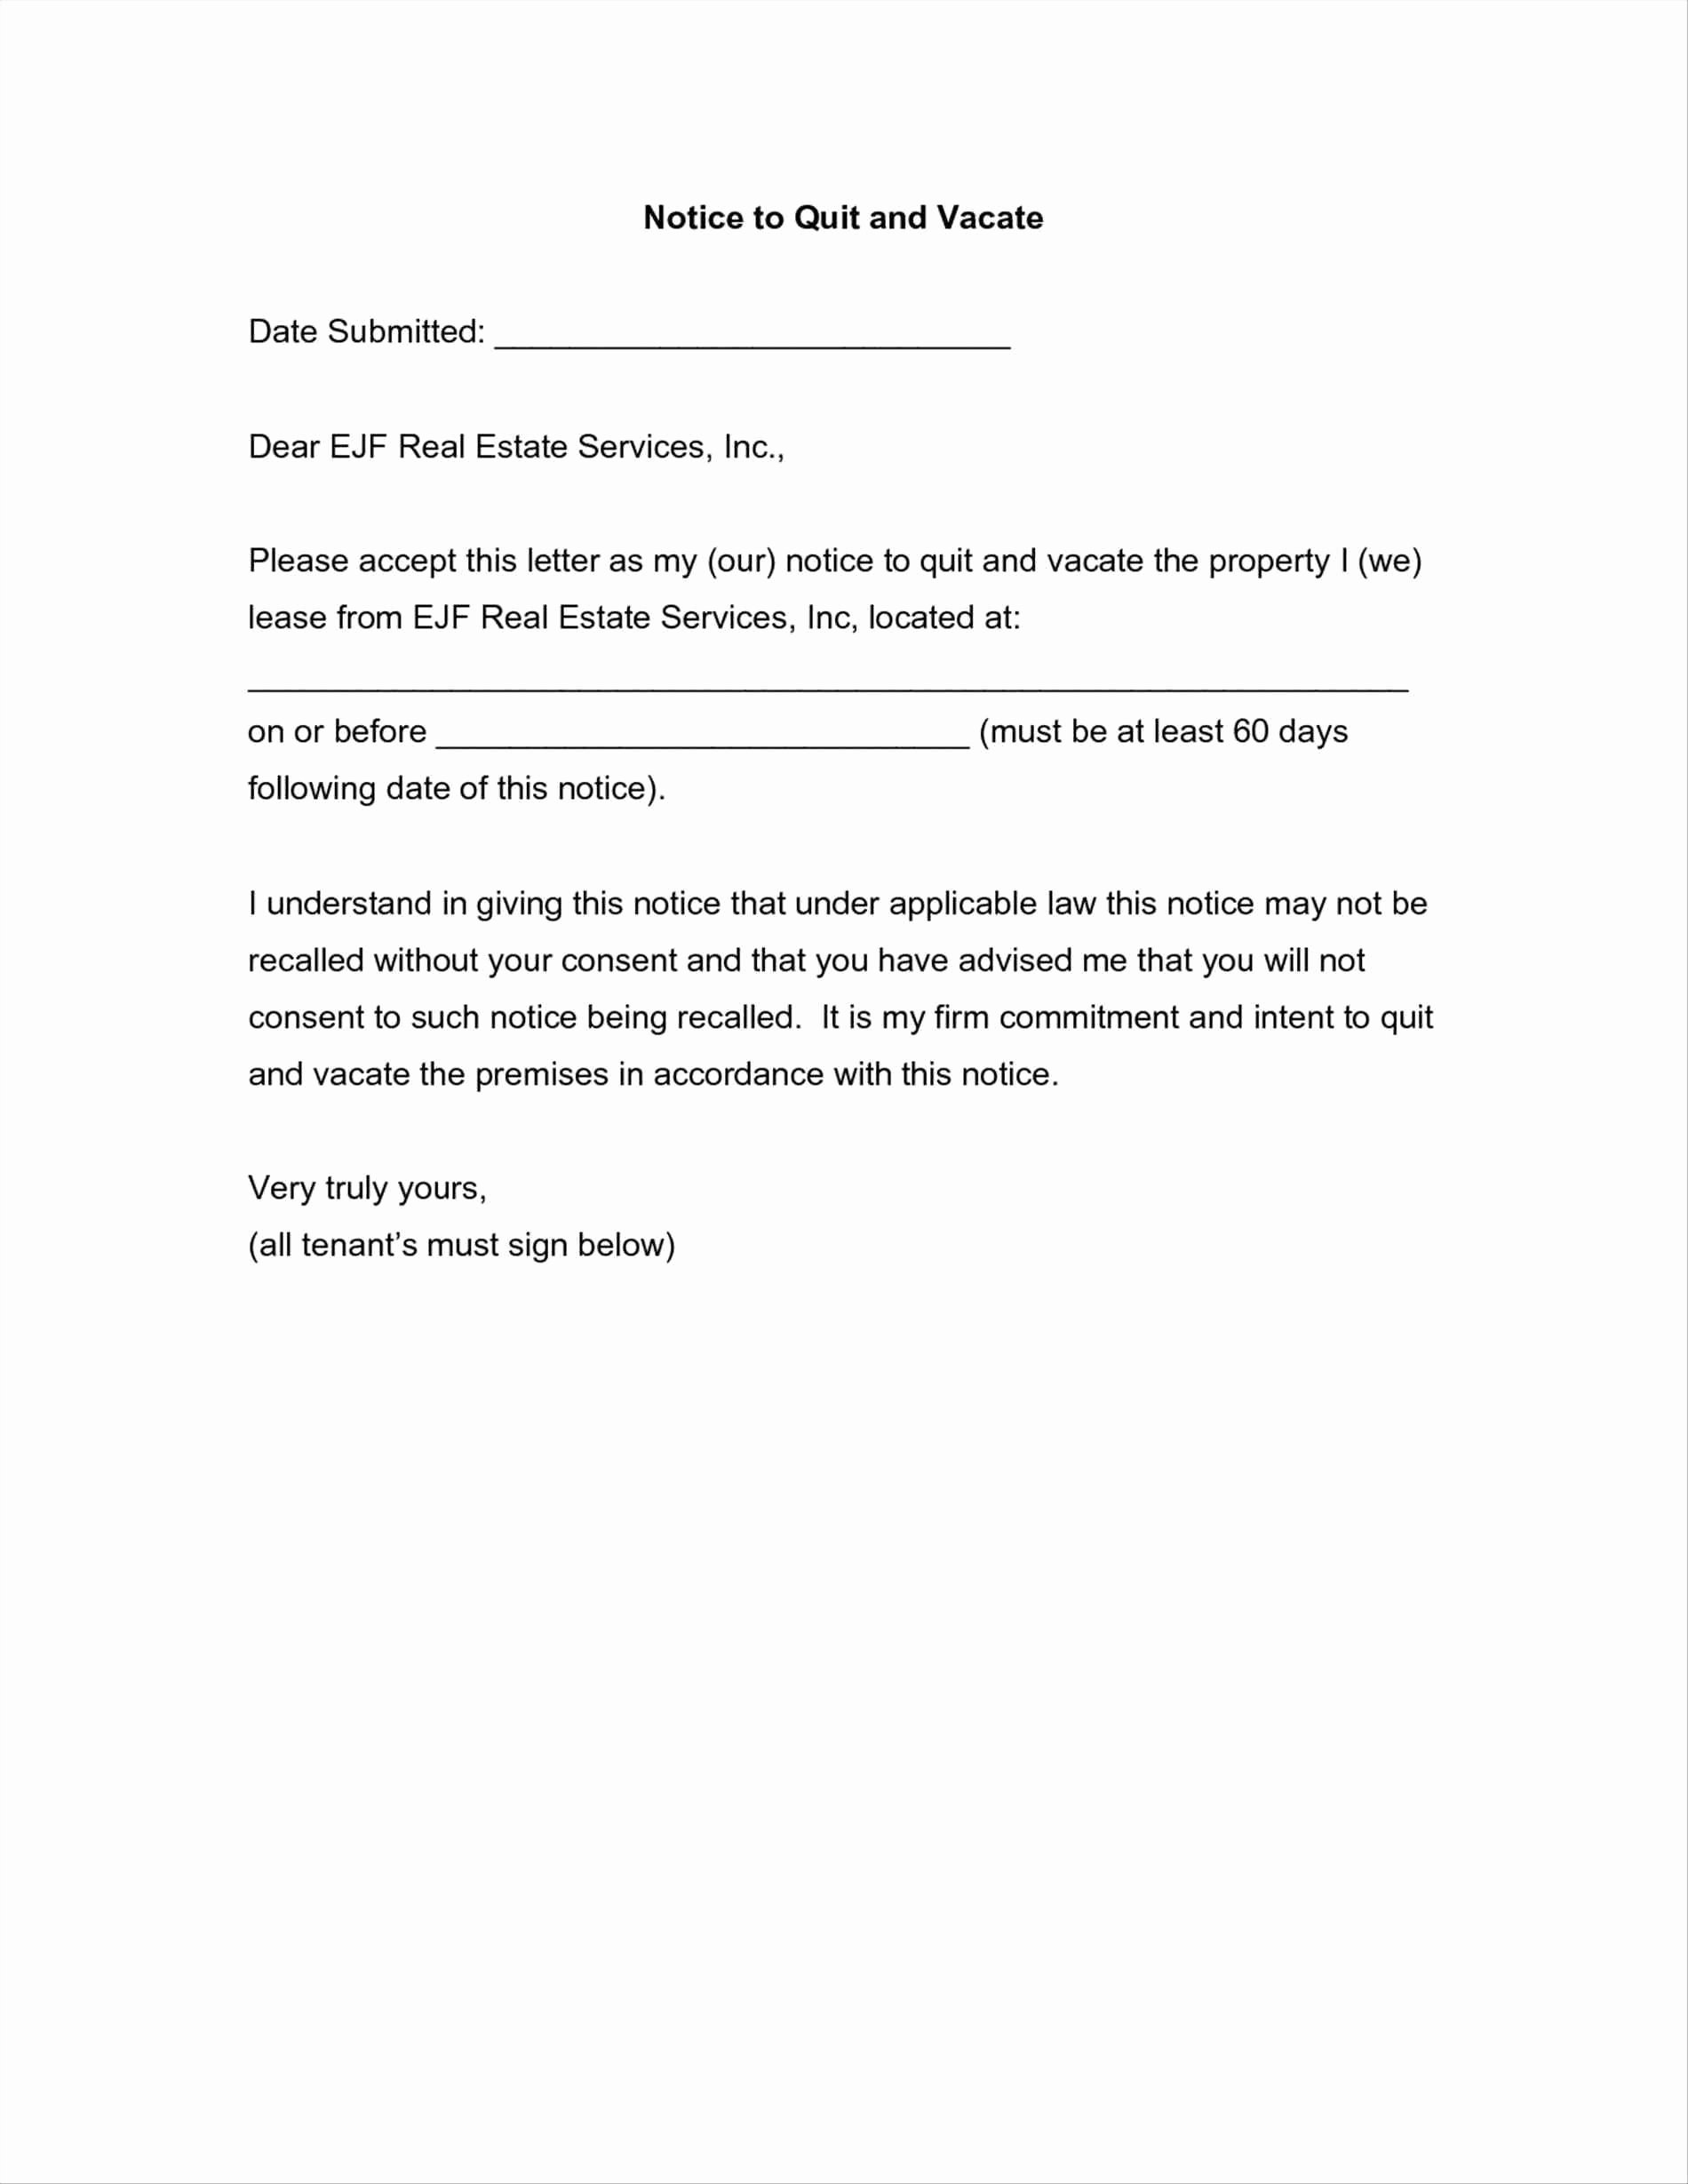 Notice to Vacate Letter Template Lovely Notice to Vacate Apartment Letter Template Samples